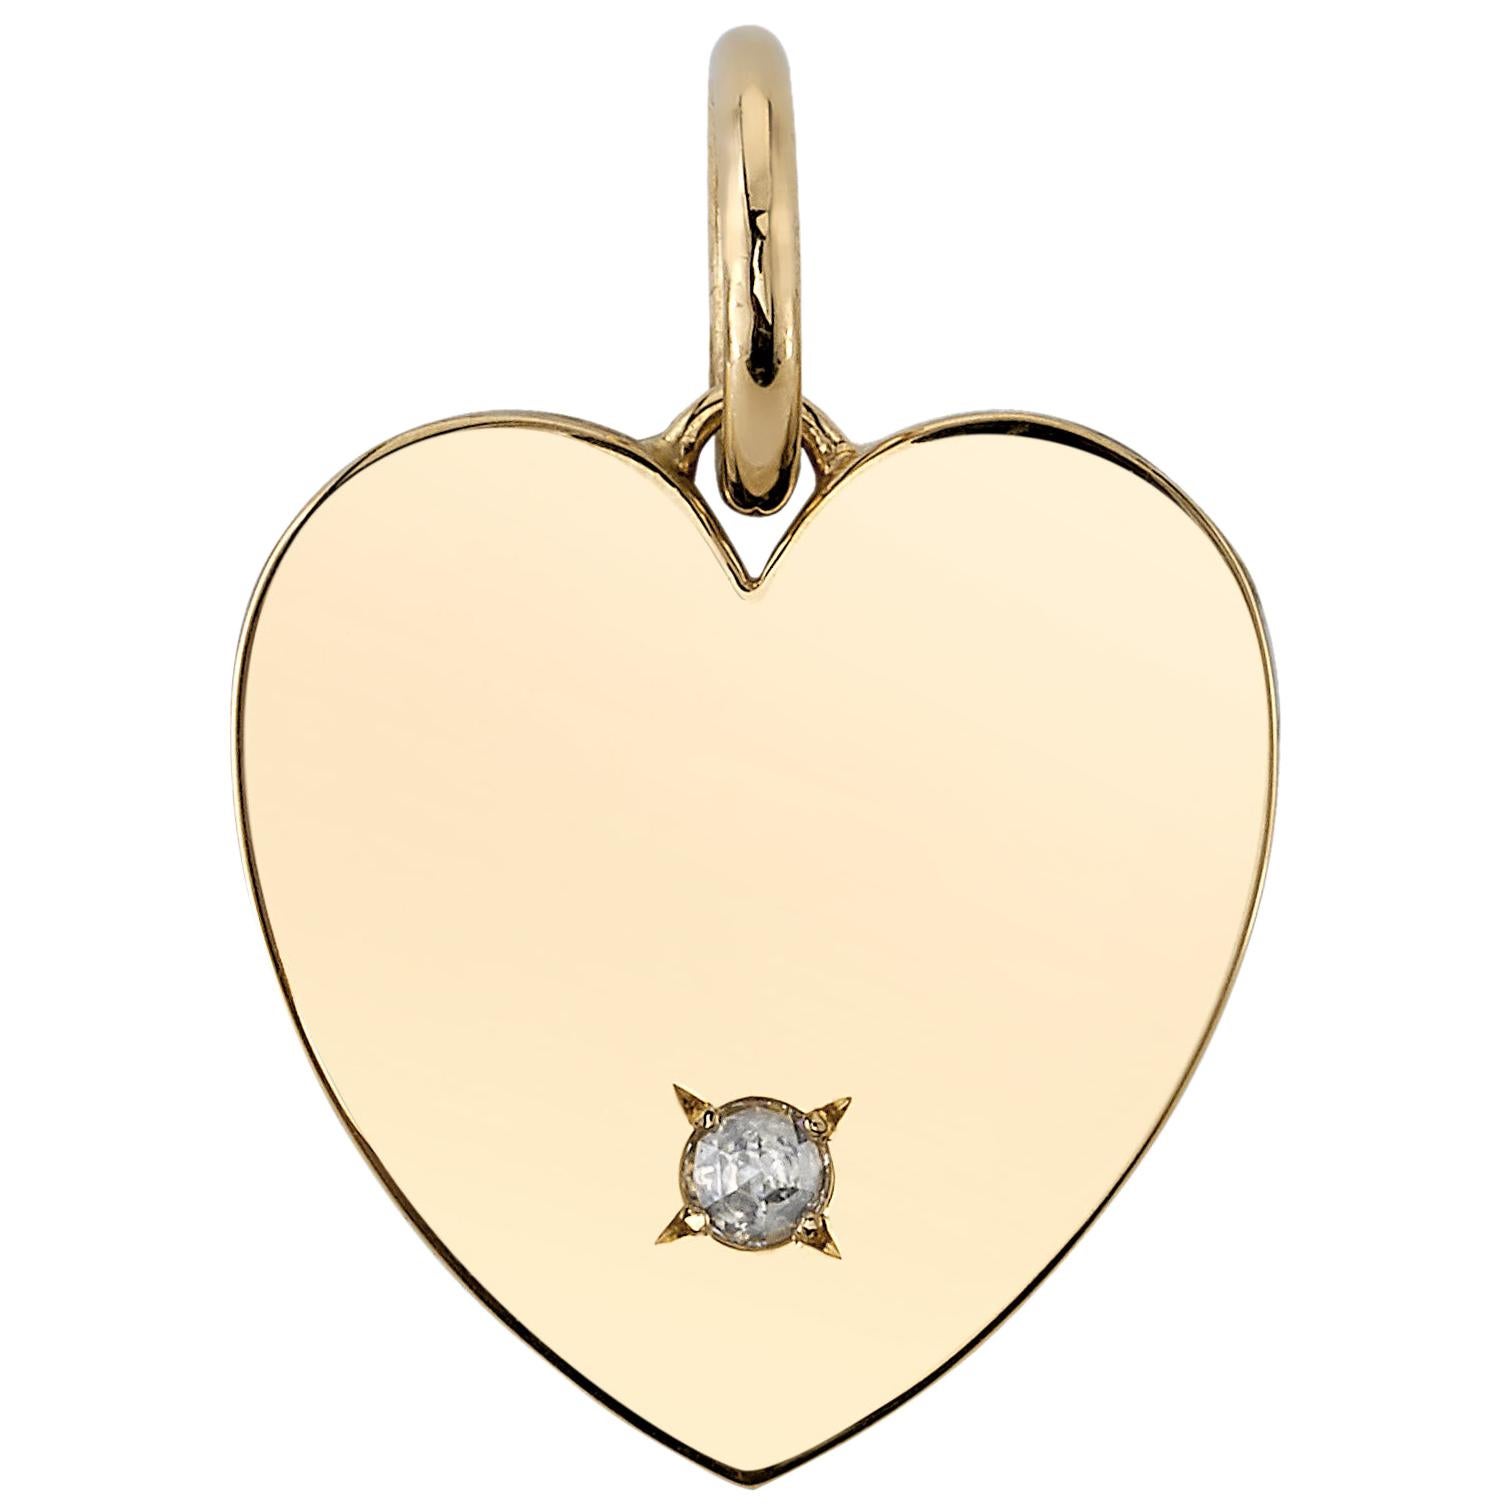 Handcrafted Minnie Rose Cut Diamond Pendant in 18K Yellow Gold by Single Stone